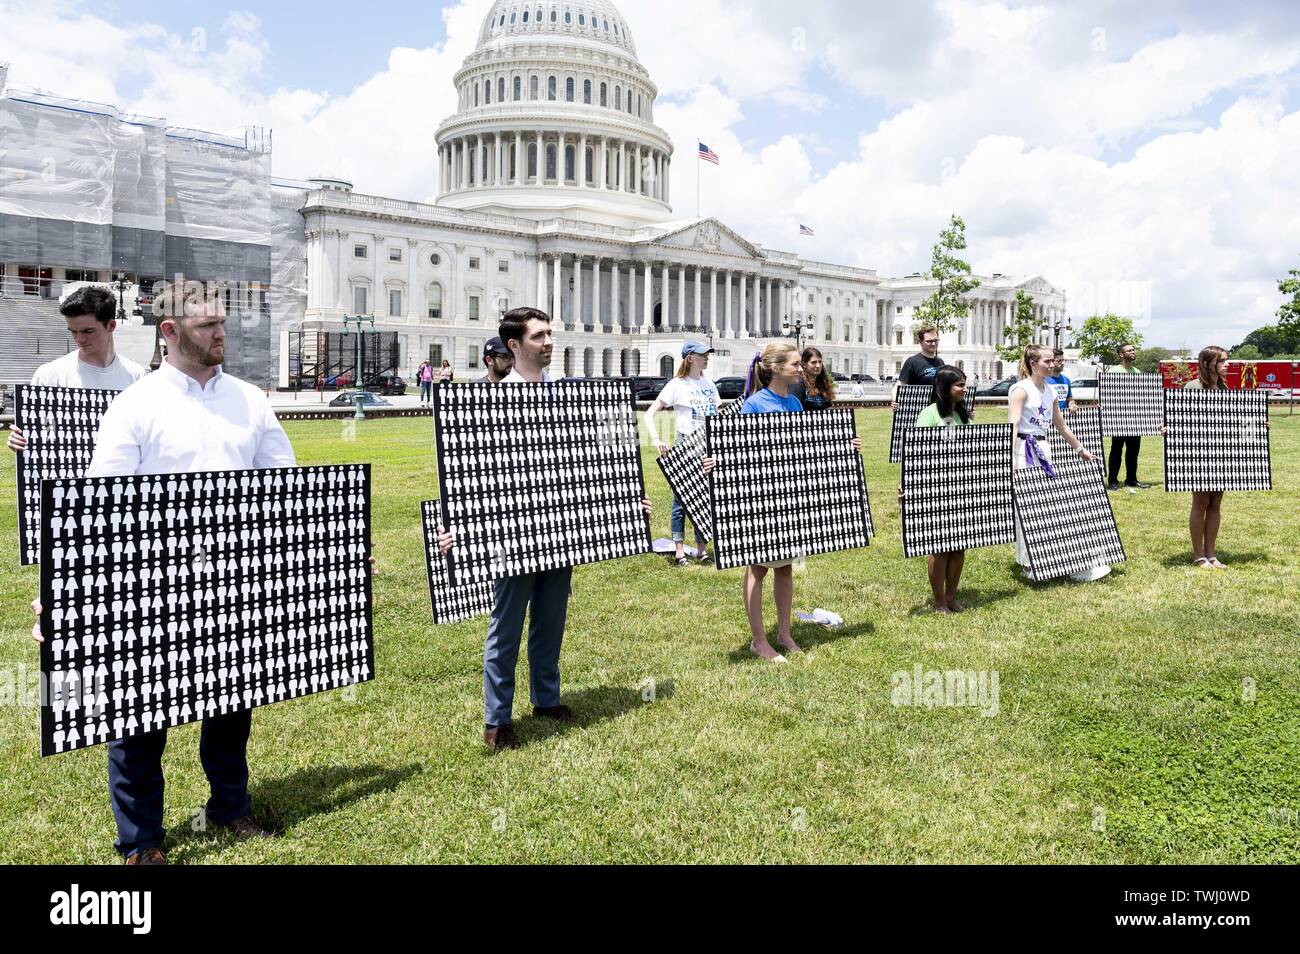 Washington, D.C, USA. 20th June, 2019. Event in front of the Capitol to urge the passage of H.R. 8 universal (gun ownership) background checks legislation. Event held on the grass on the eastern side of the U.S. Capitol in Washington, DC on June 20, 2019. Credit: Michael Brochstein/ZUMA Wire/Alamy Live News Stock Photo